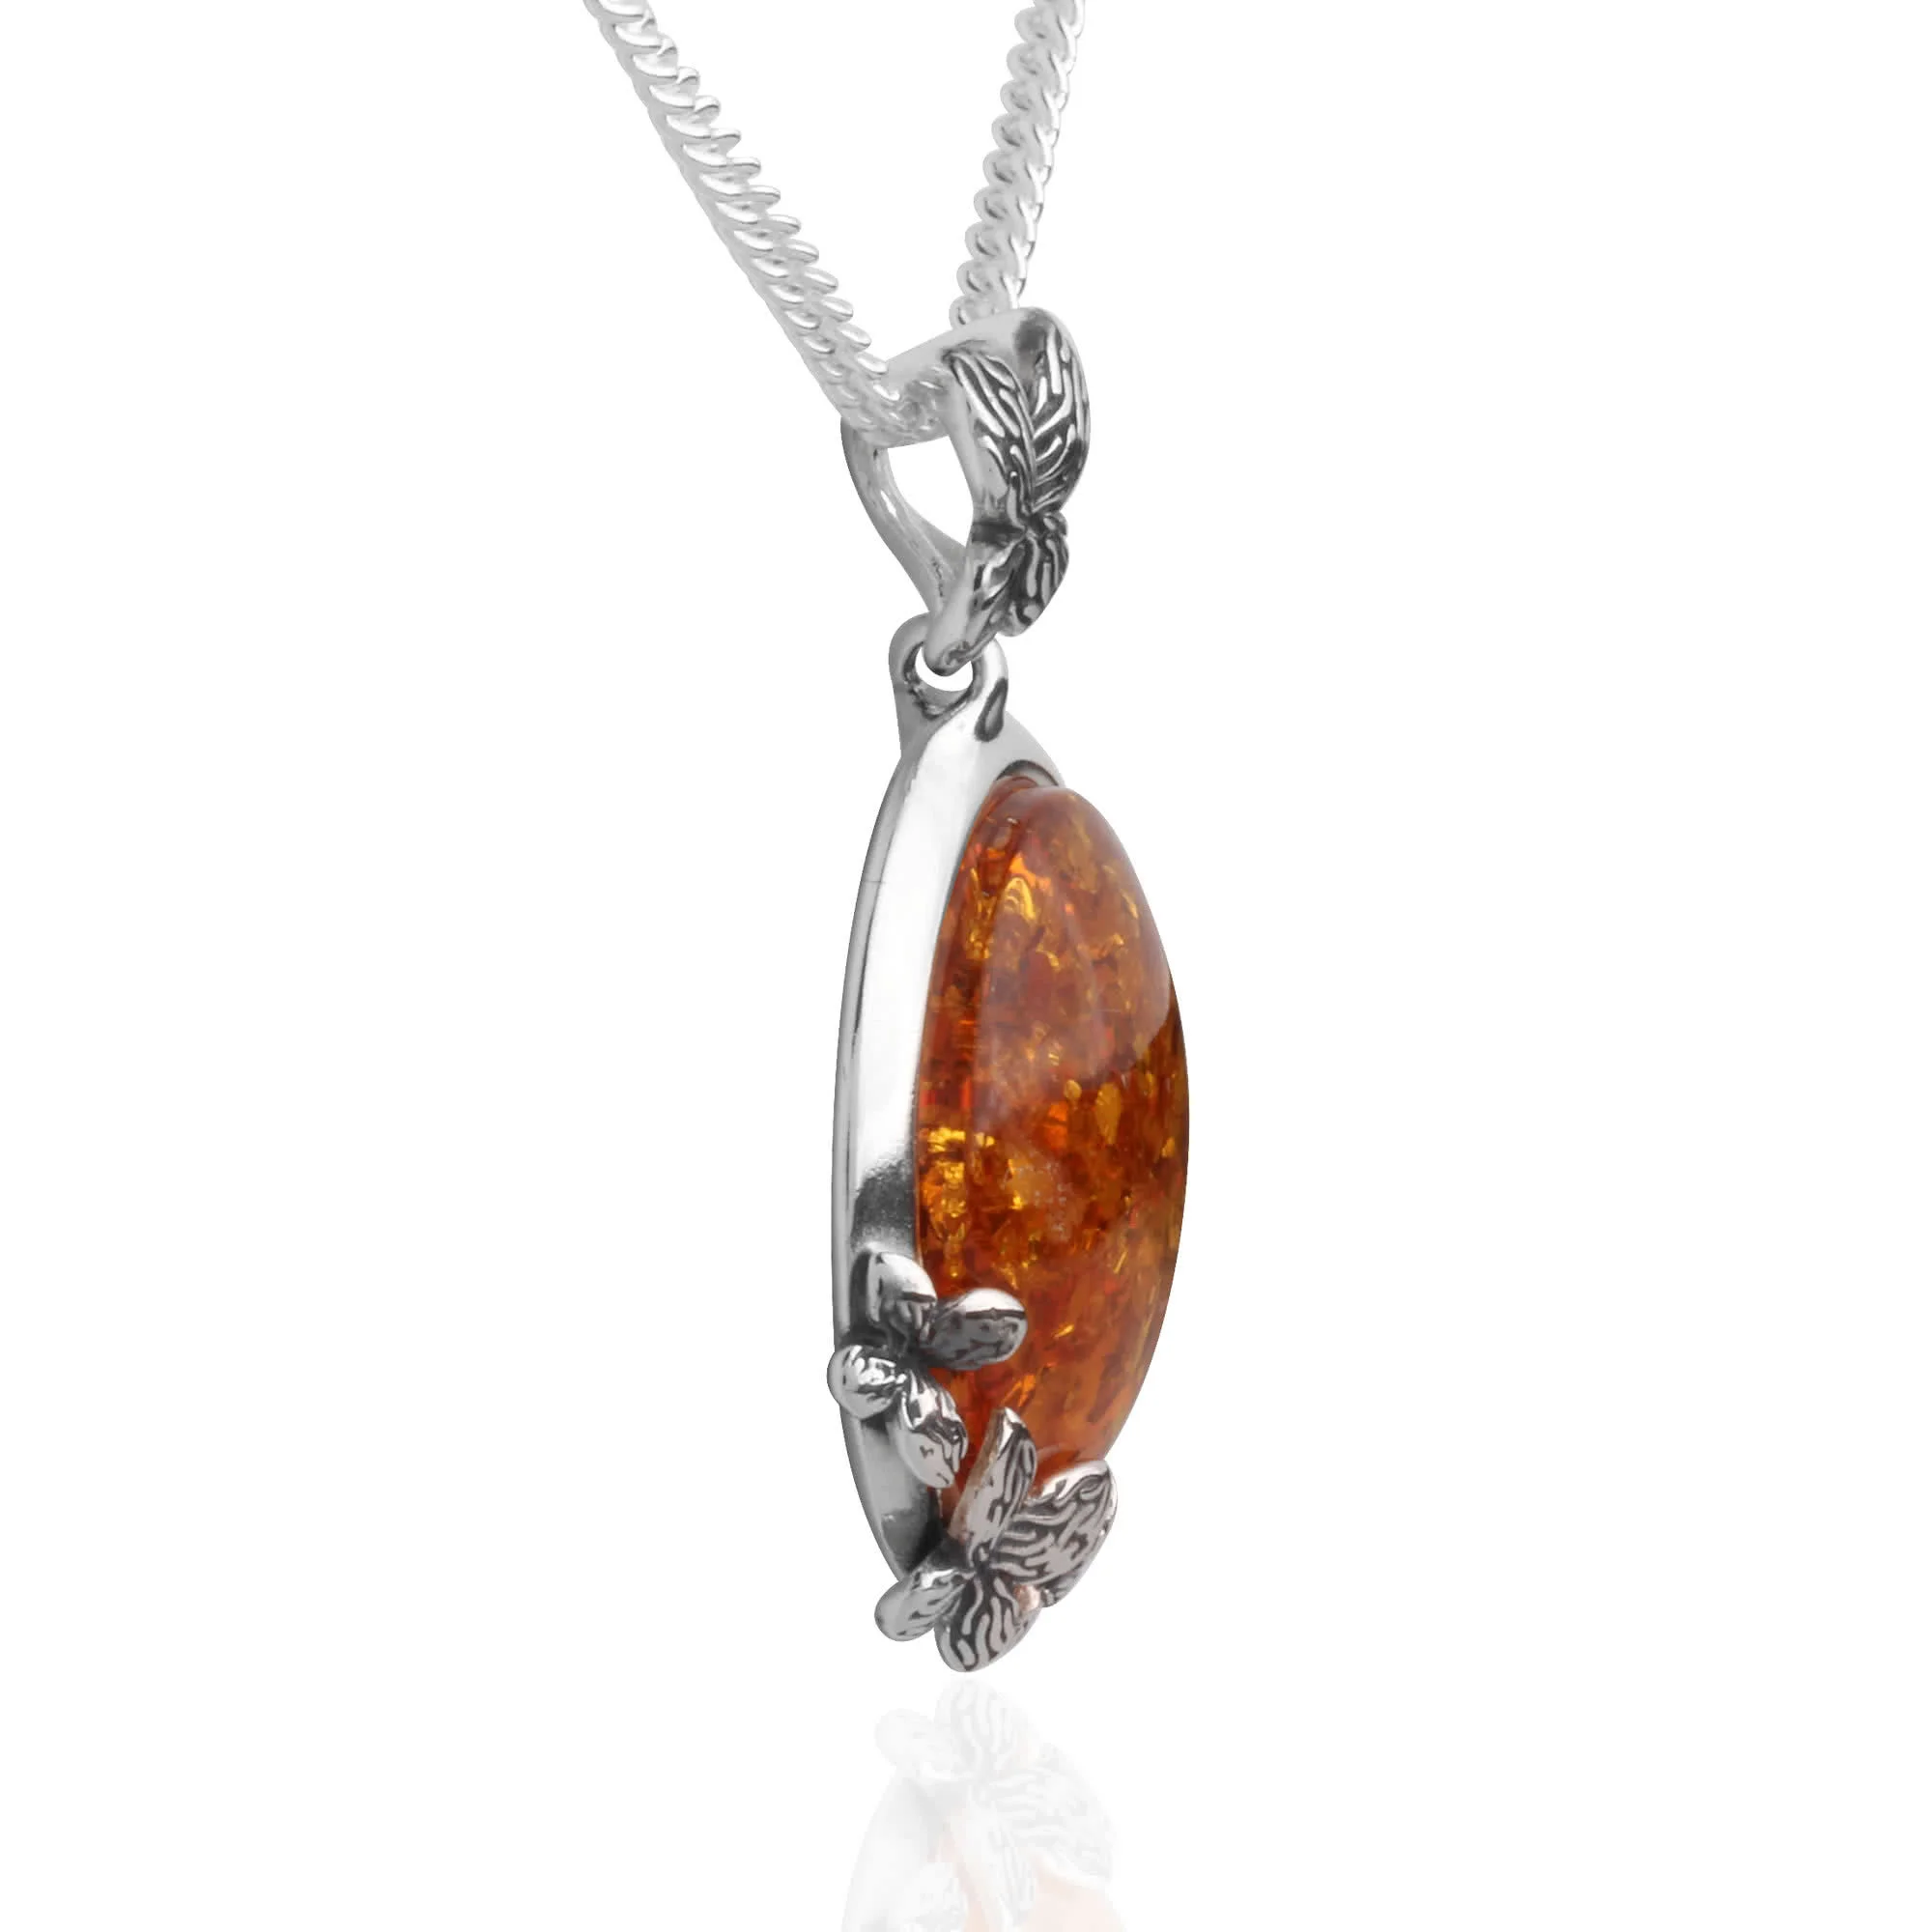 Large Round Baltic Amber With Silver Butterflies Around The Pendant